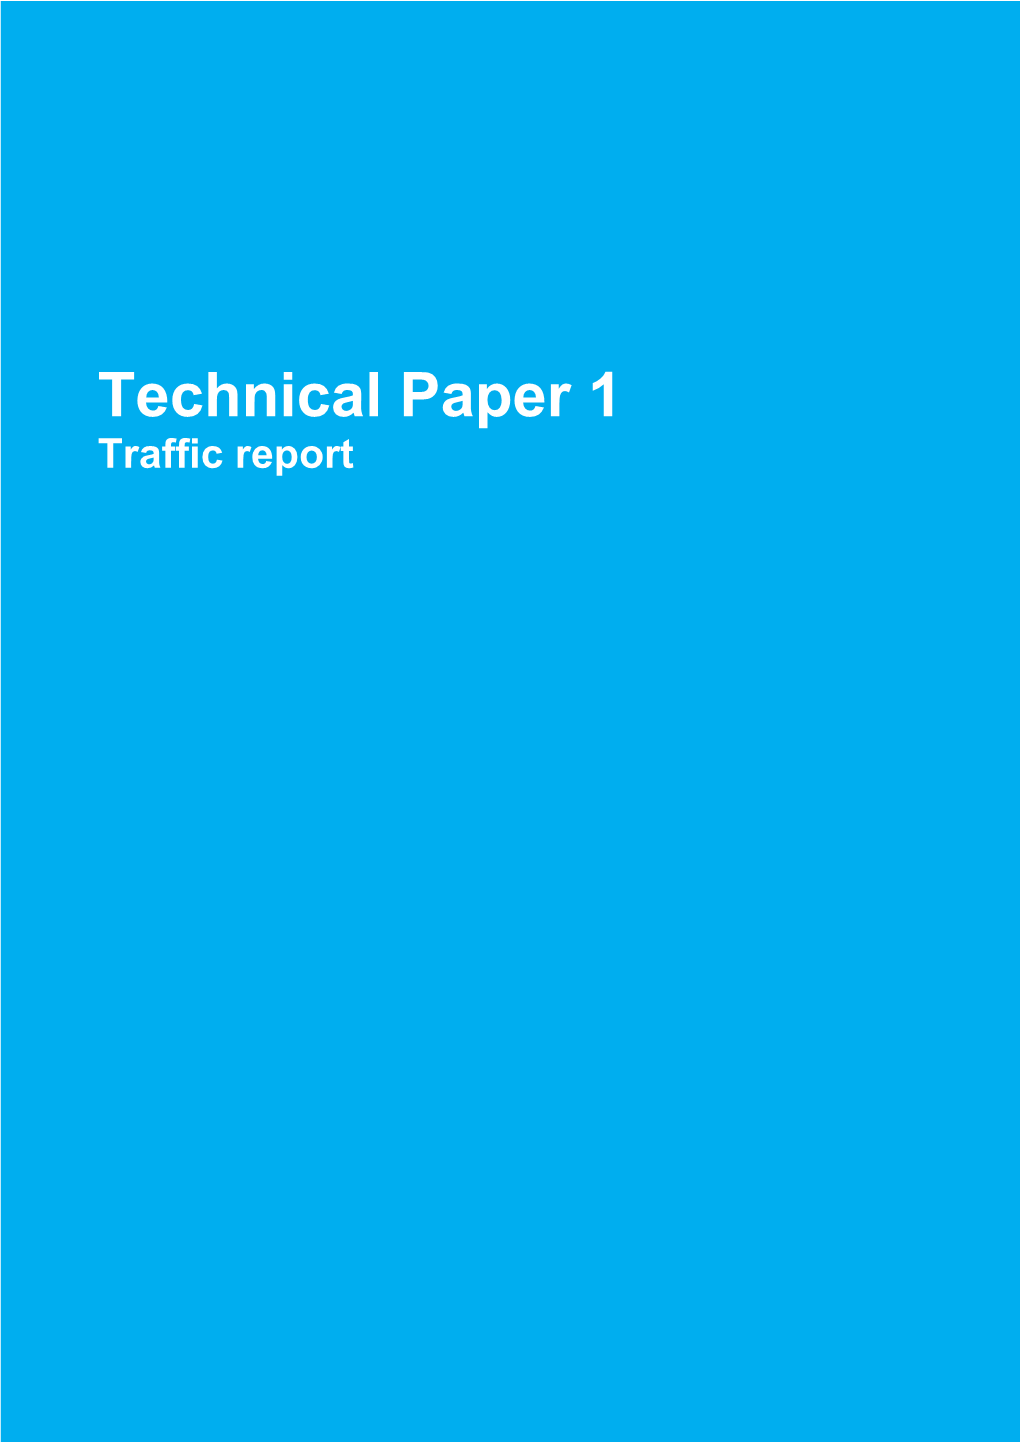 Technical Paper 1 Traffic Report